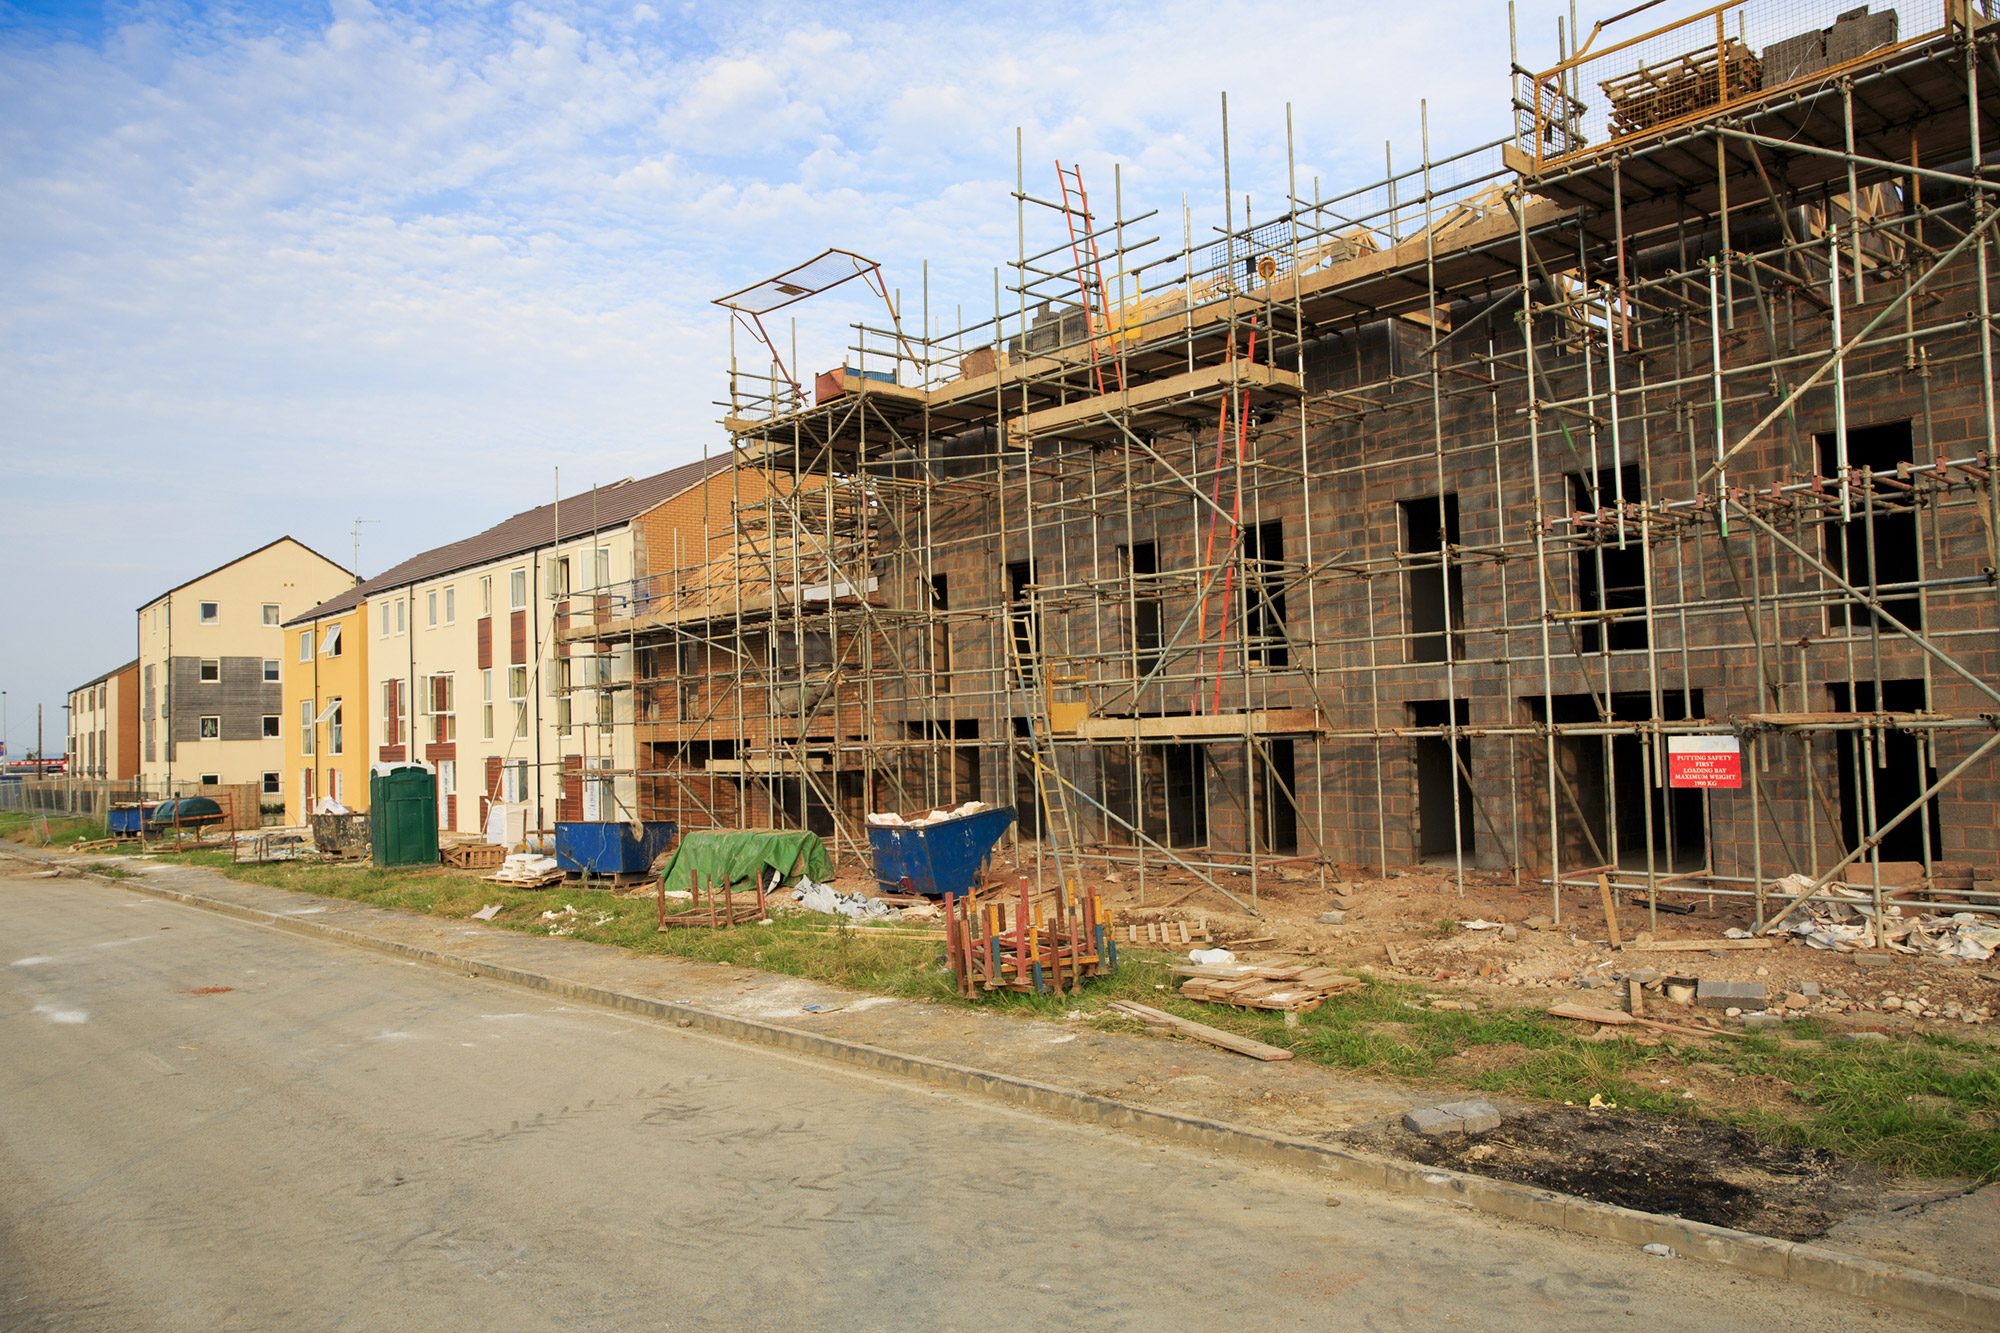 Housing charity Shelter says Self Build can help solve the housing crisis